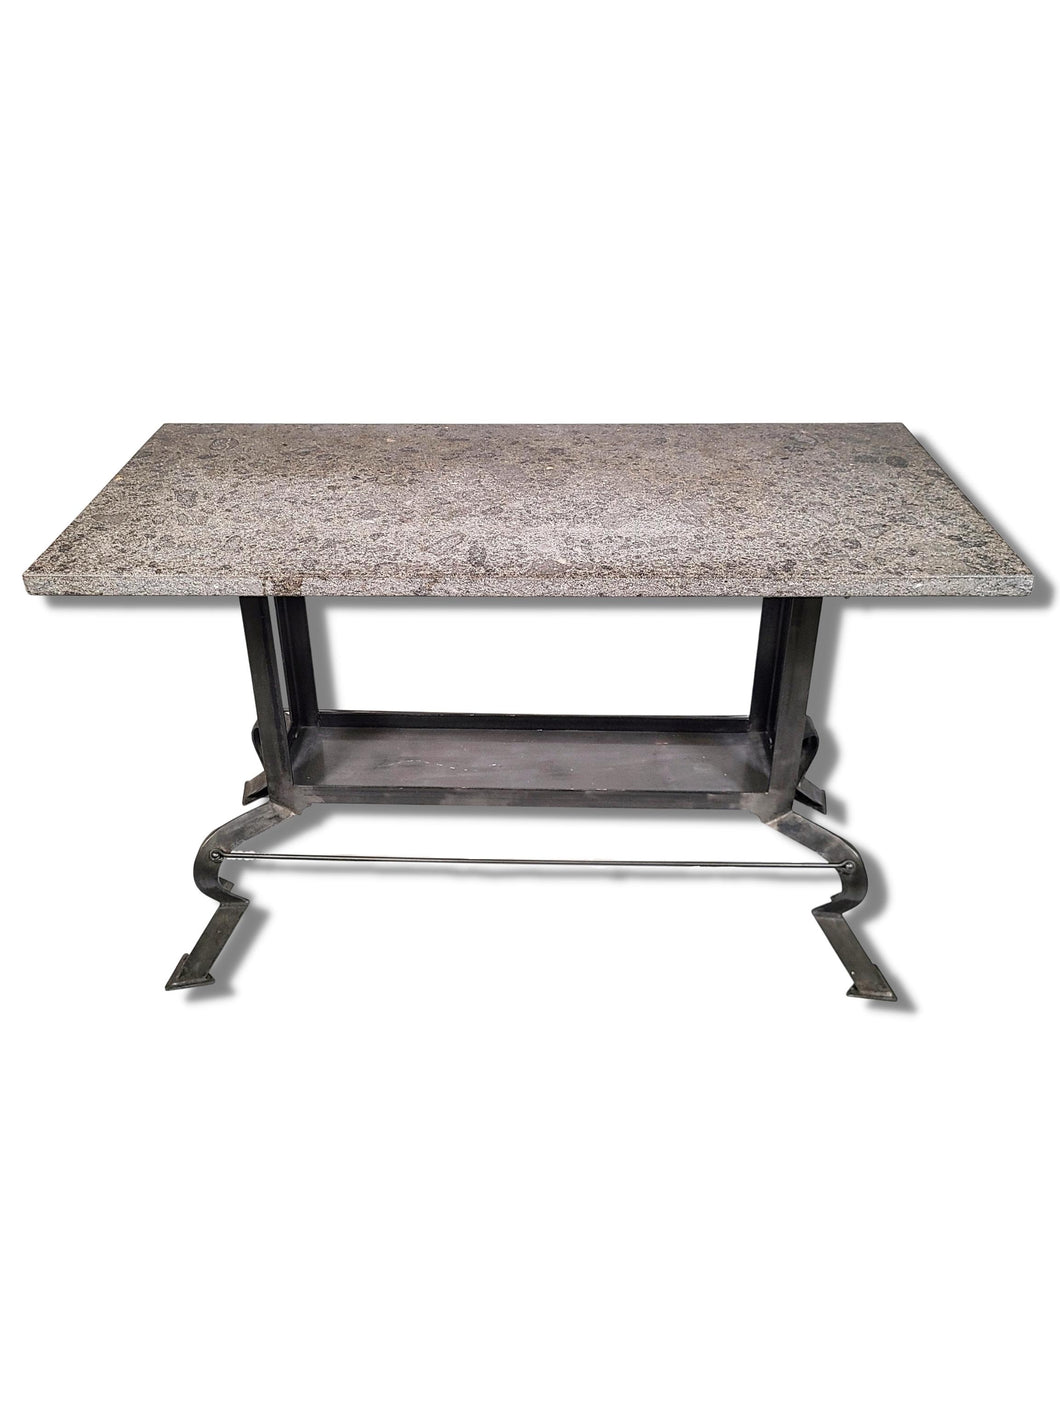 Vintage Stone Top Table